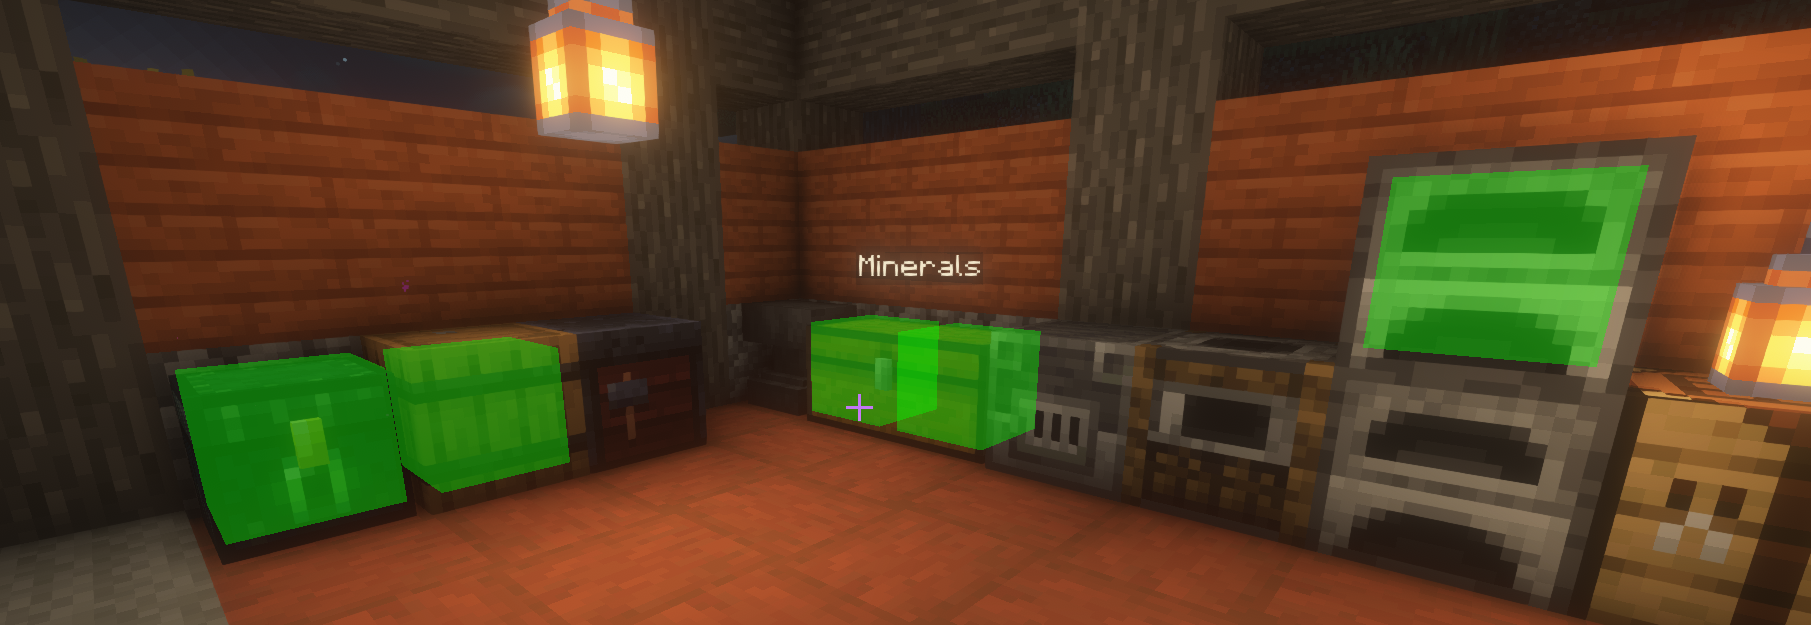 An example of a successful search, showing results for 4 containers including a named chest and the player's specific ender chest.

Shaders: Iris 1.20-1.6.4/Sodium 1.20-0.4.10 with BSL 8.2.04